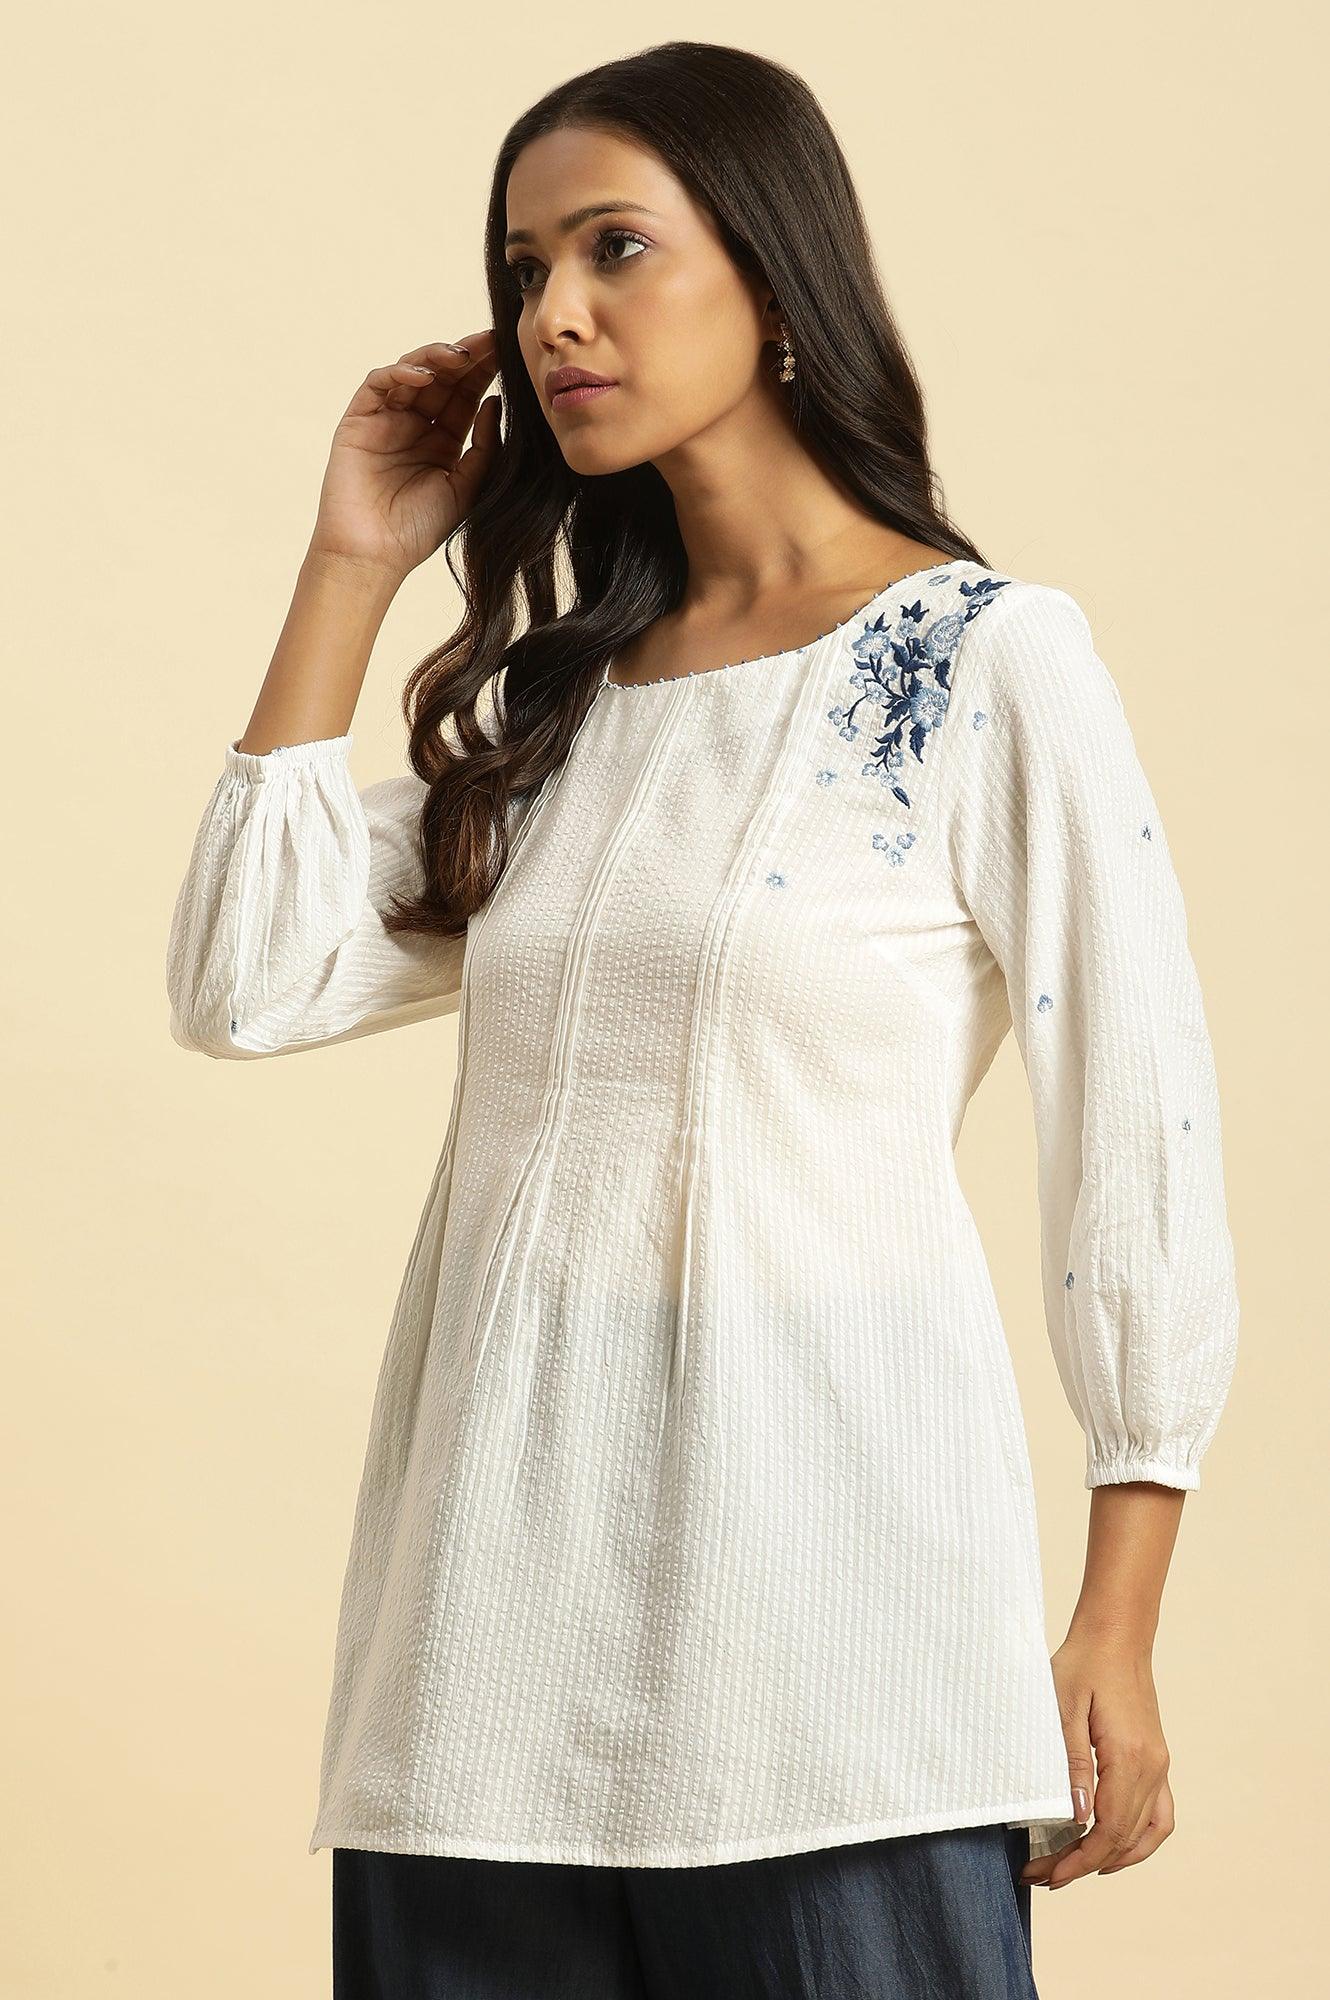 White Front Pleated Top With Embroidery - wforwoman